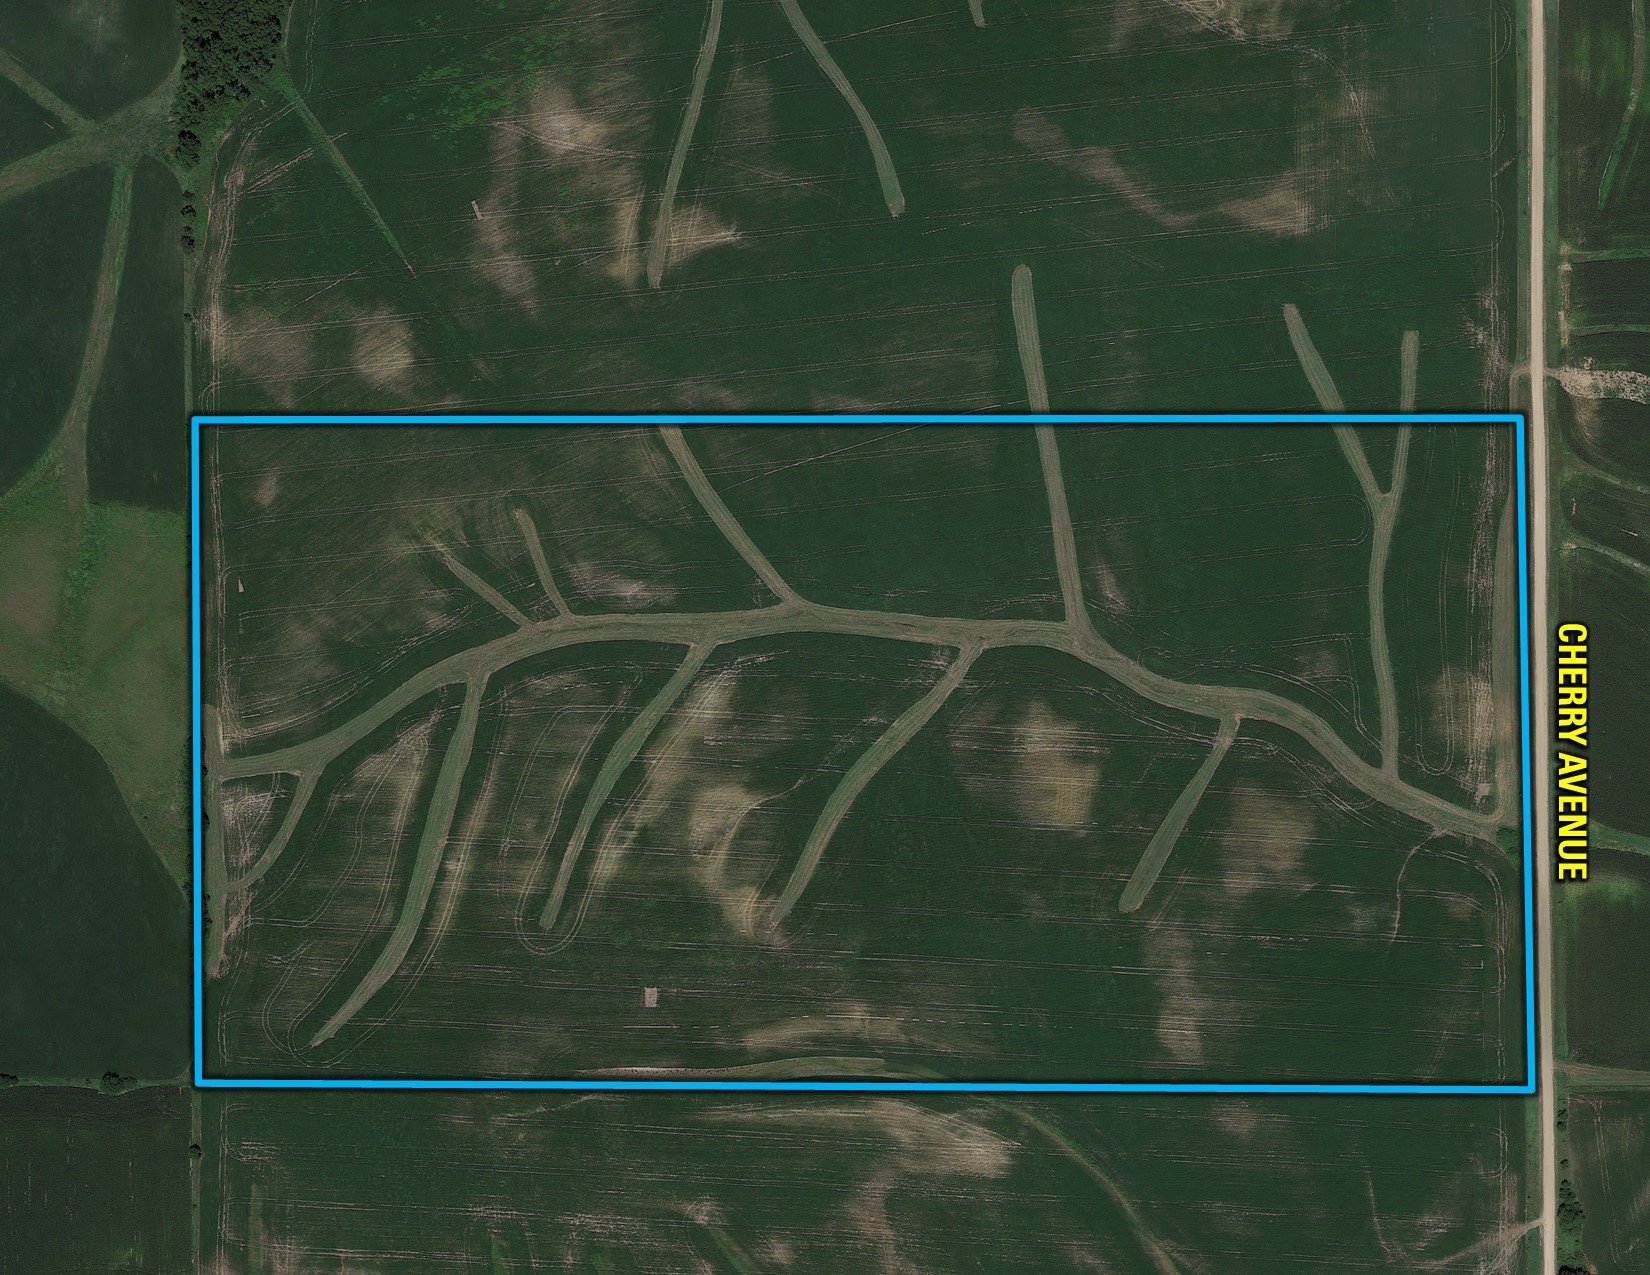 auctions-land-guthrie-county-iowa-80-acres-listing-number-16666-Google Close Farm-0.jpg